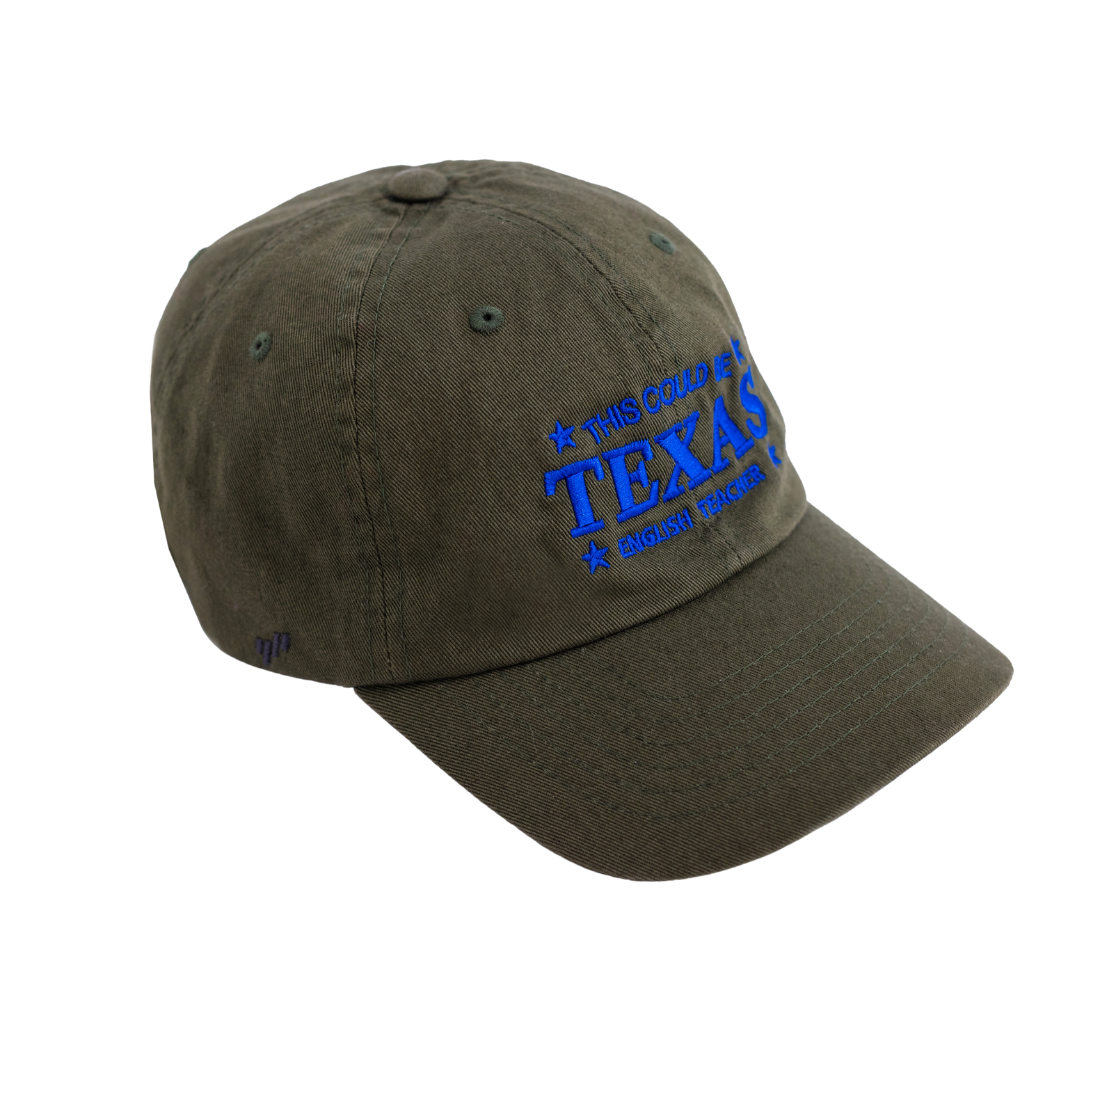 English Teacher - This Could Be Texas Green Embroidered Cap